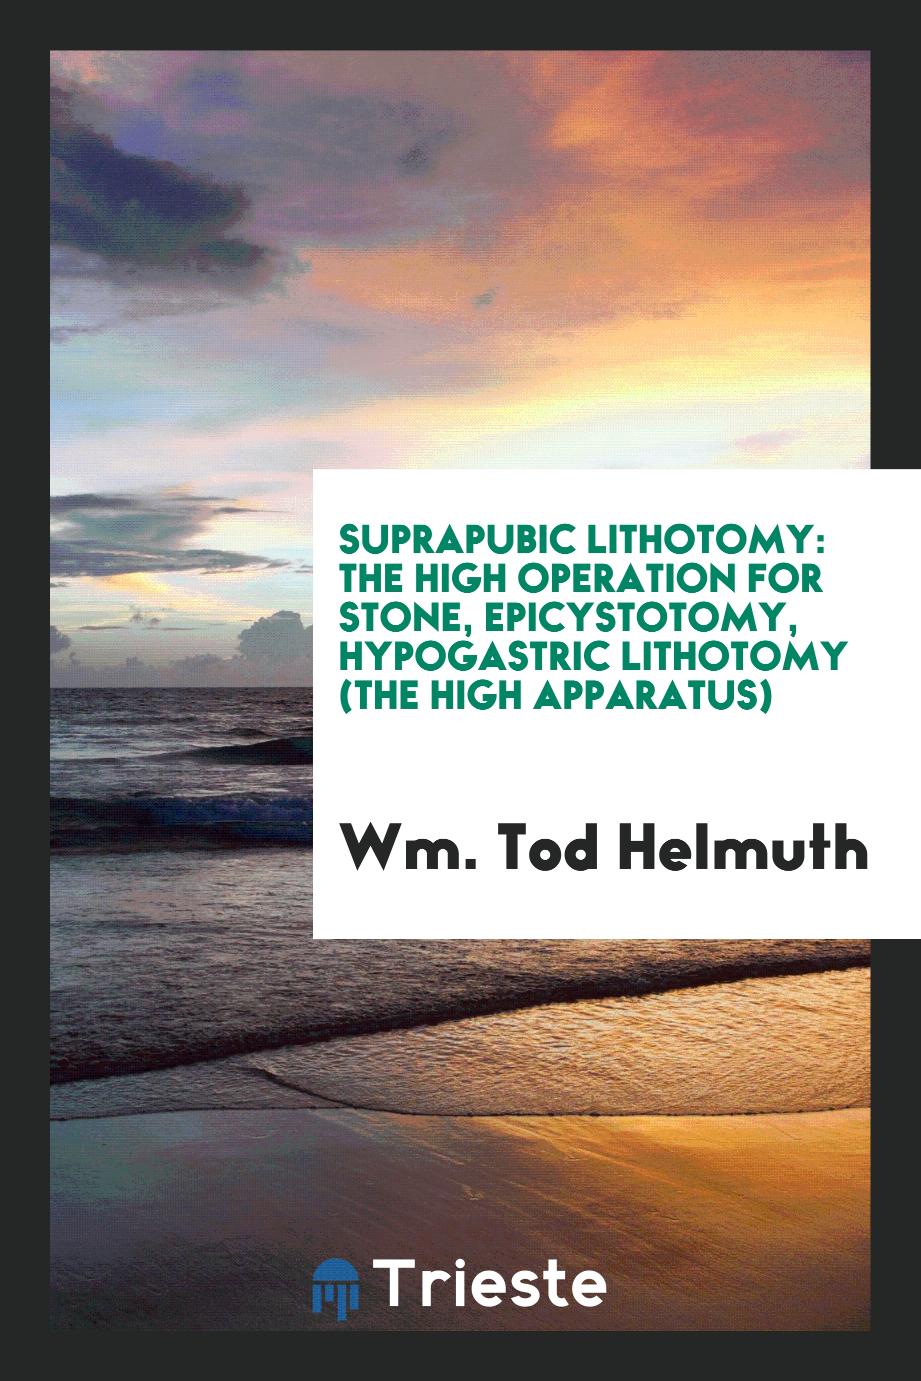 Suprapubic Lithotomy: The High Operation for Stone, Epicystotomy, Hypogastric Lithotomy (the High Apparatus)